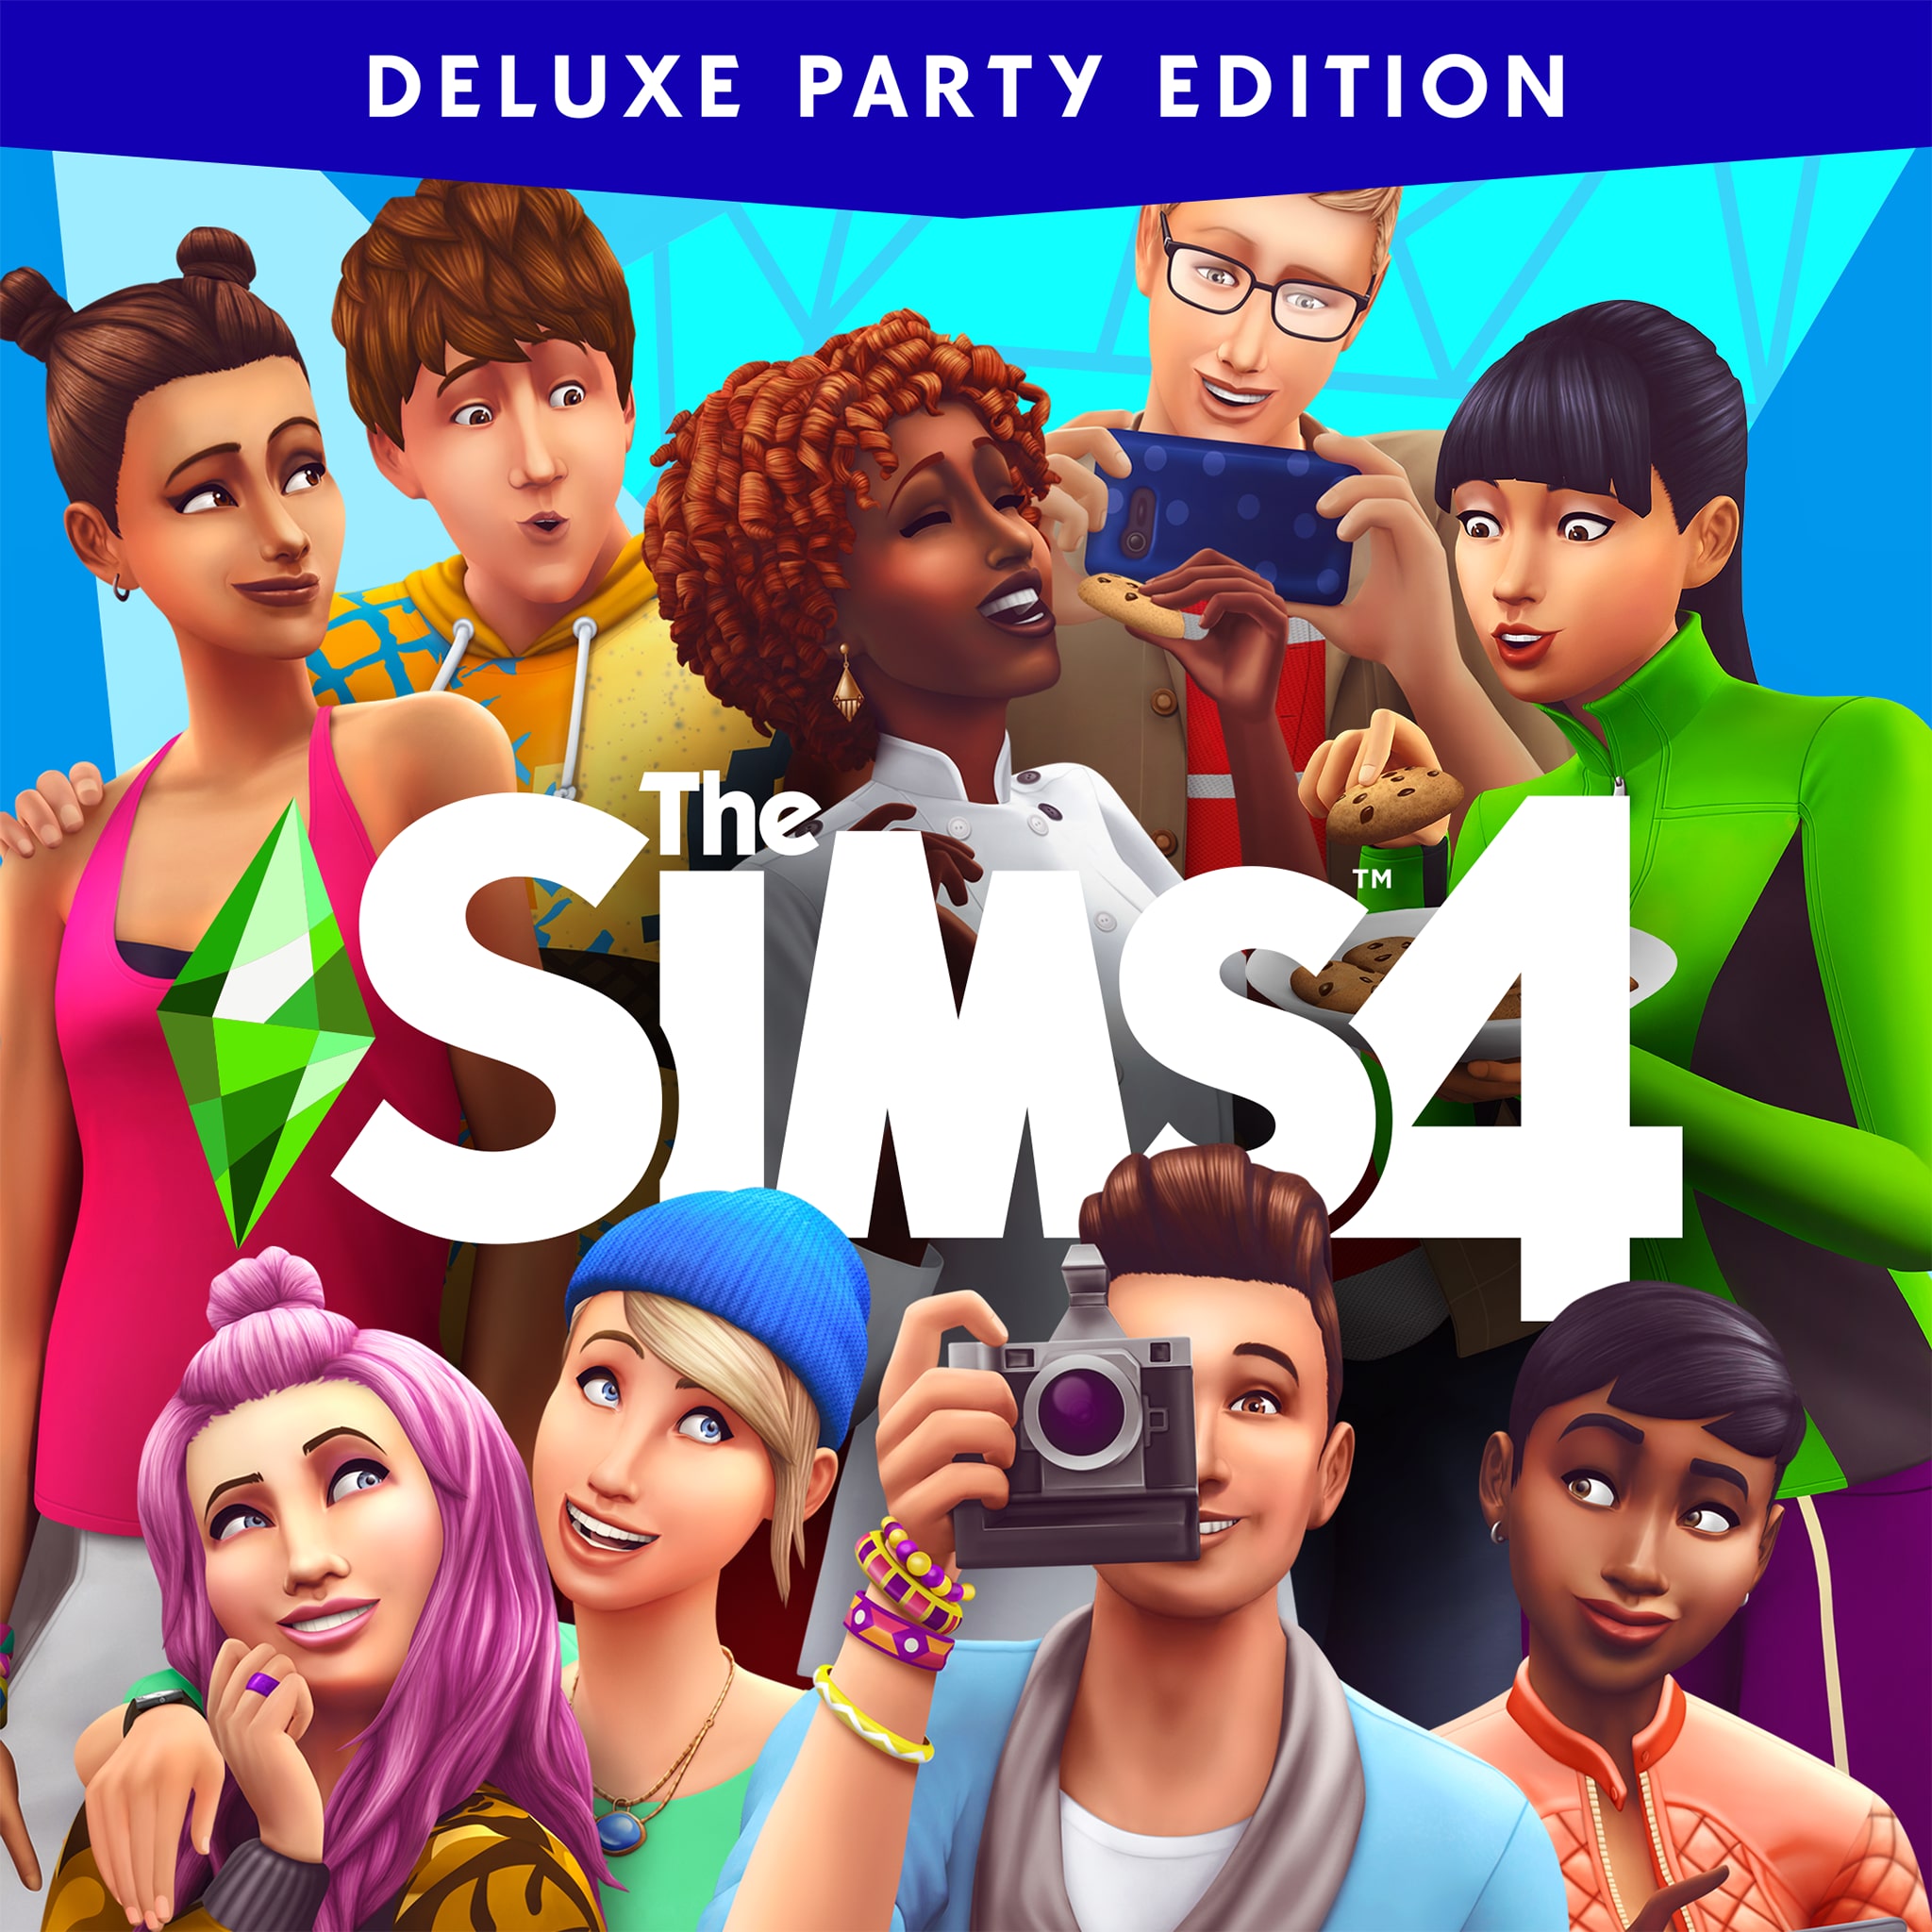 sims 4 deluxe download